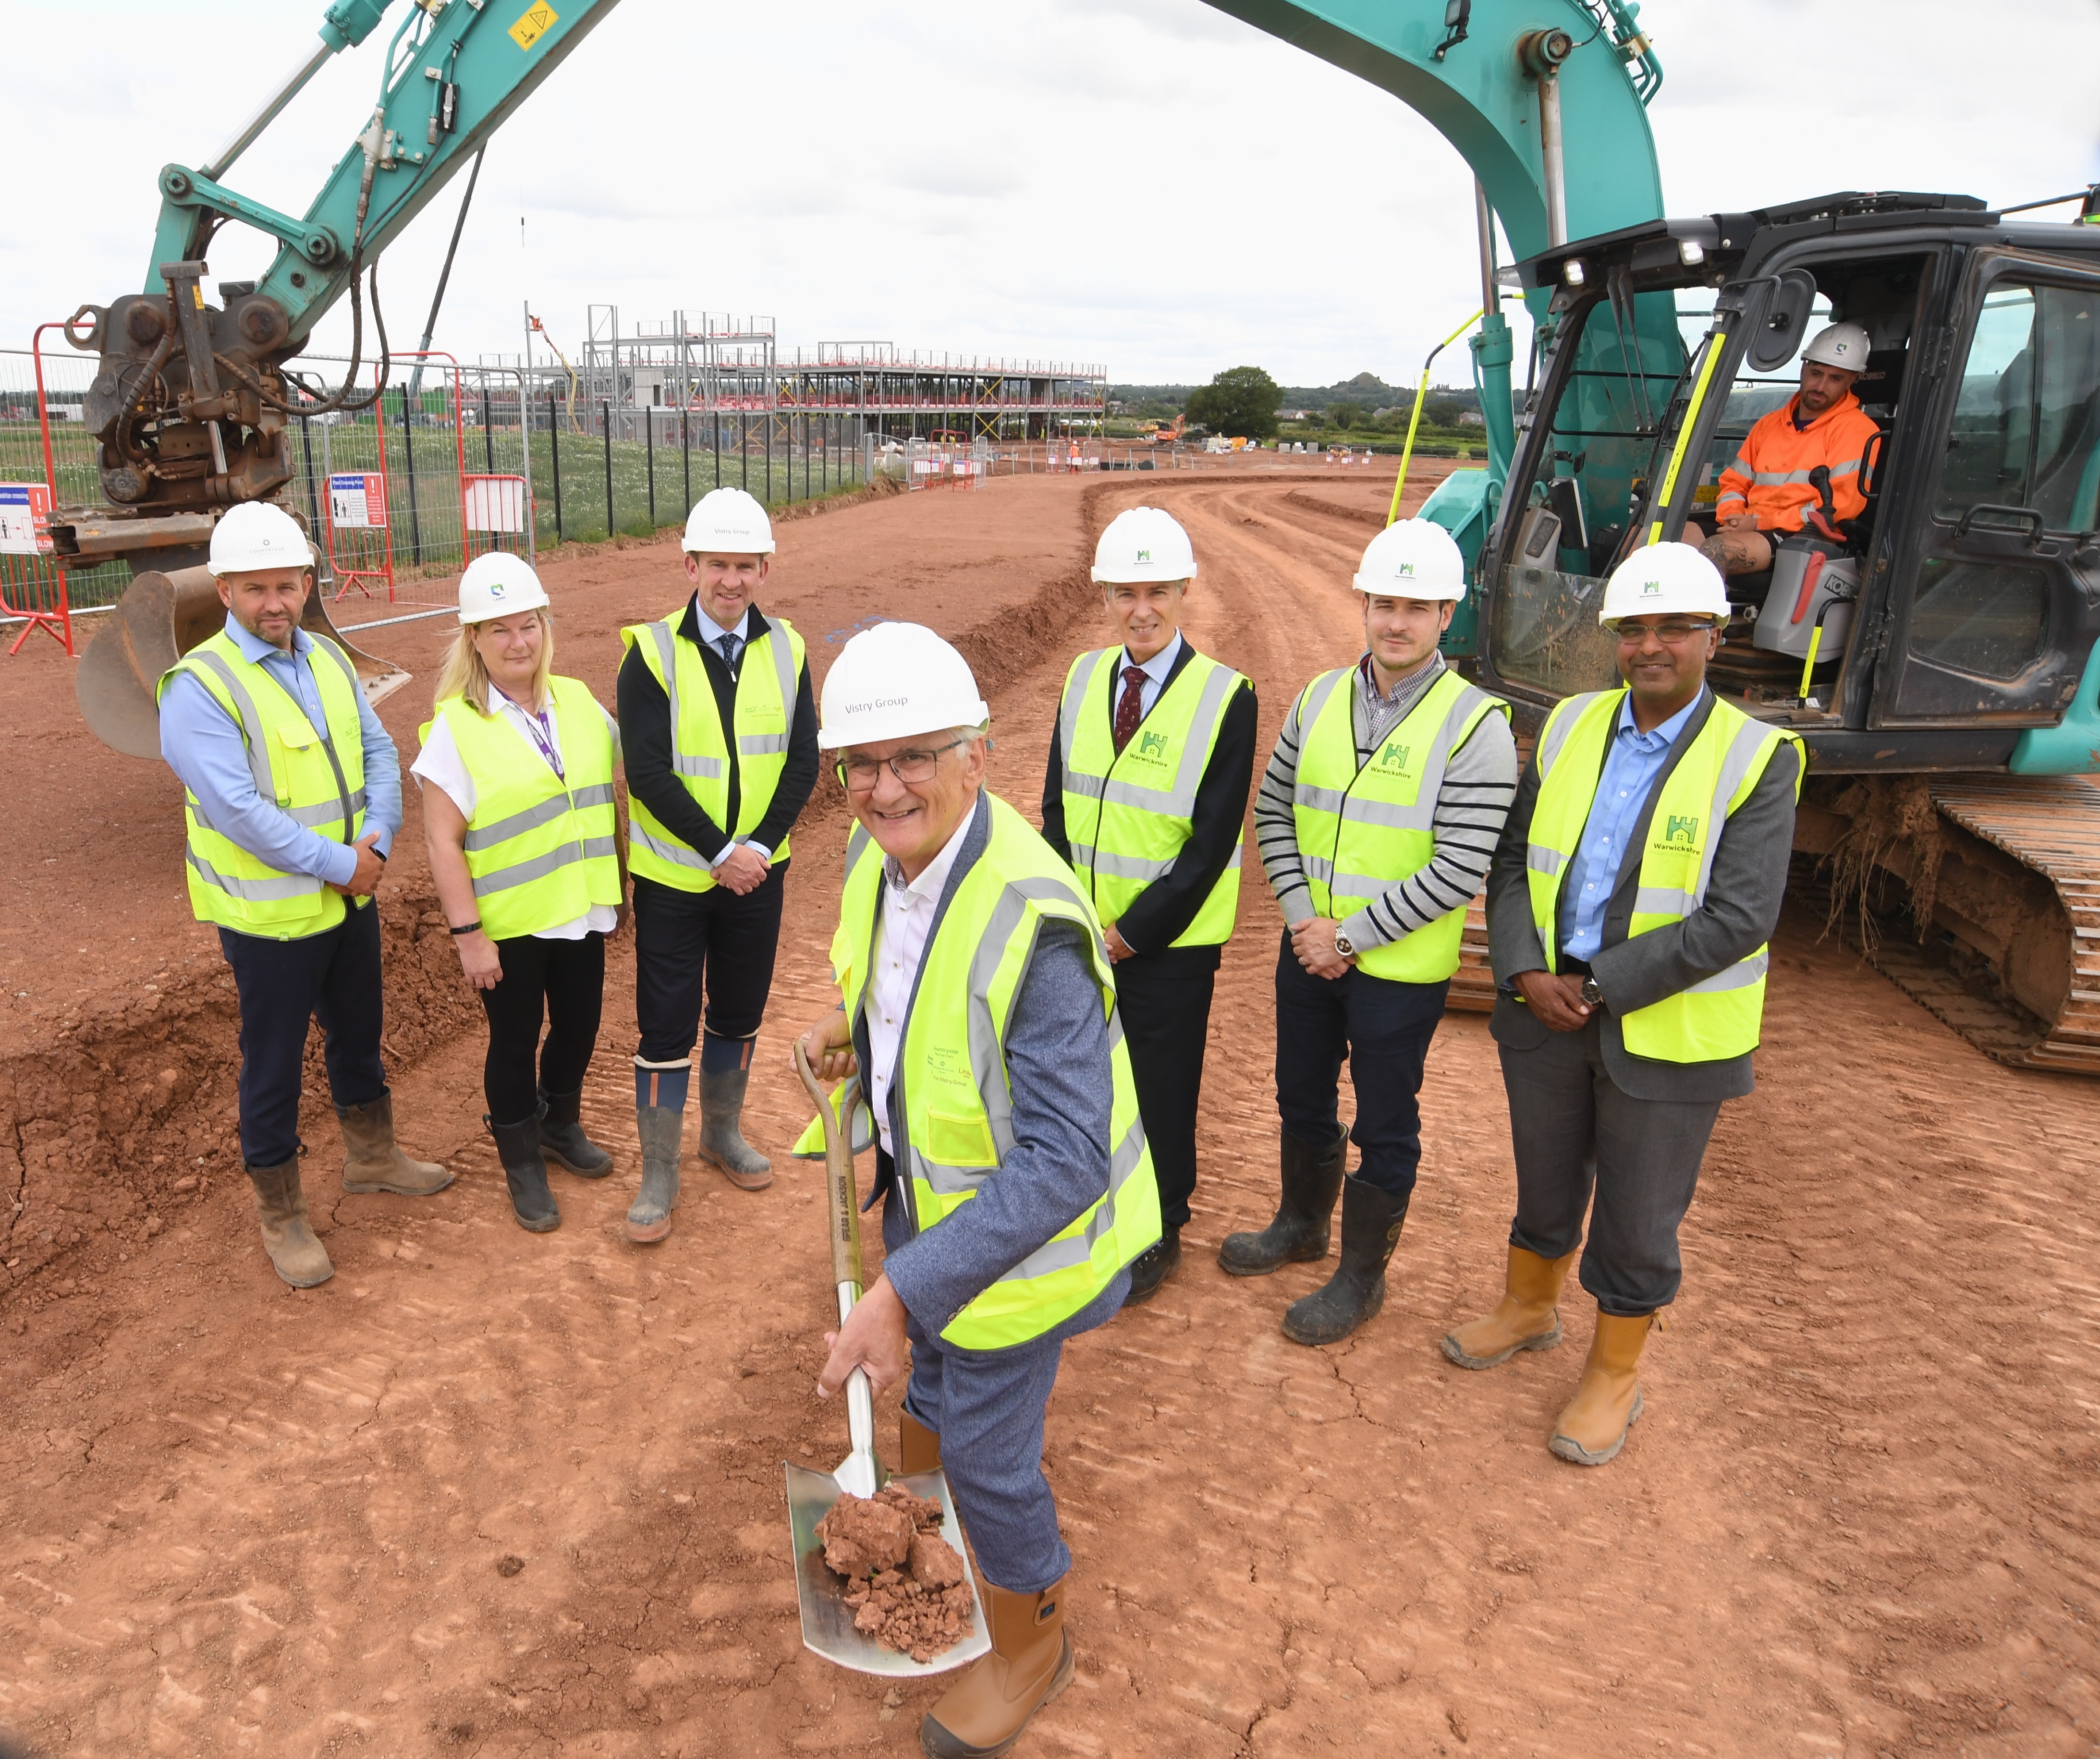 From left to right, Leighton Claire (Vistry), Joanne Noakes (Platform Housing Group), Phil McHugh (Vistry), Cllr Peter Butlin, James Devereux (WPDG), Rob Andrews (WPDG) and Stuart Buckley (WPDG) at the Top Farm construction site in Weddington.